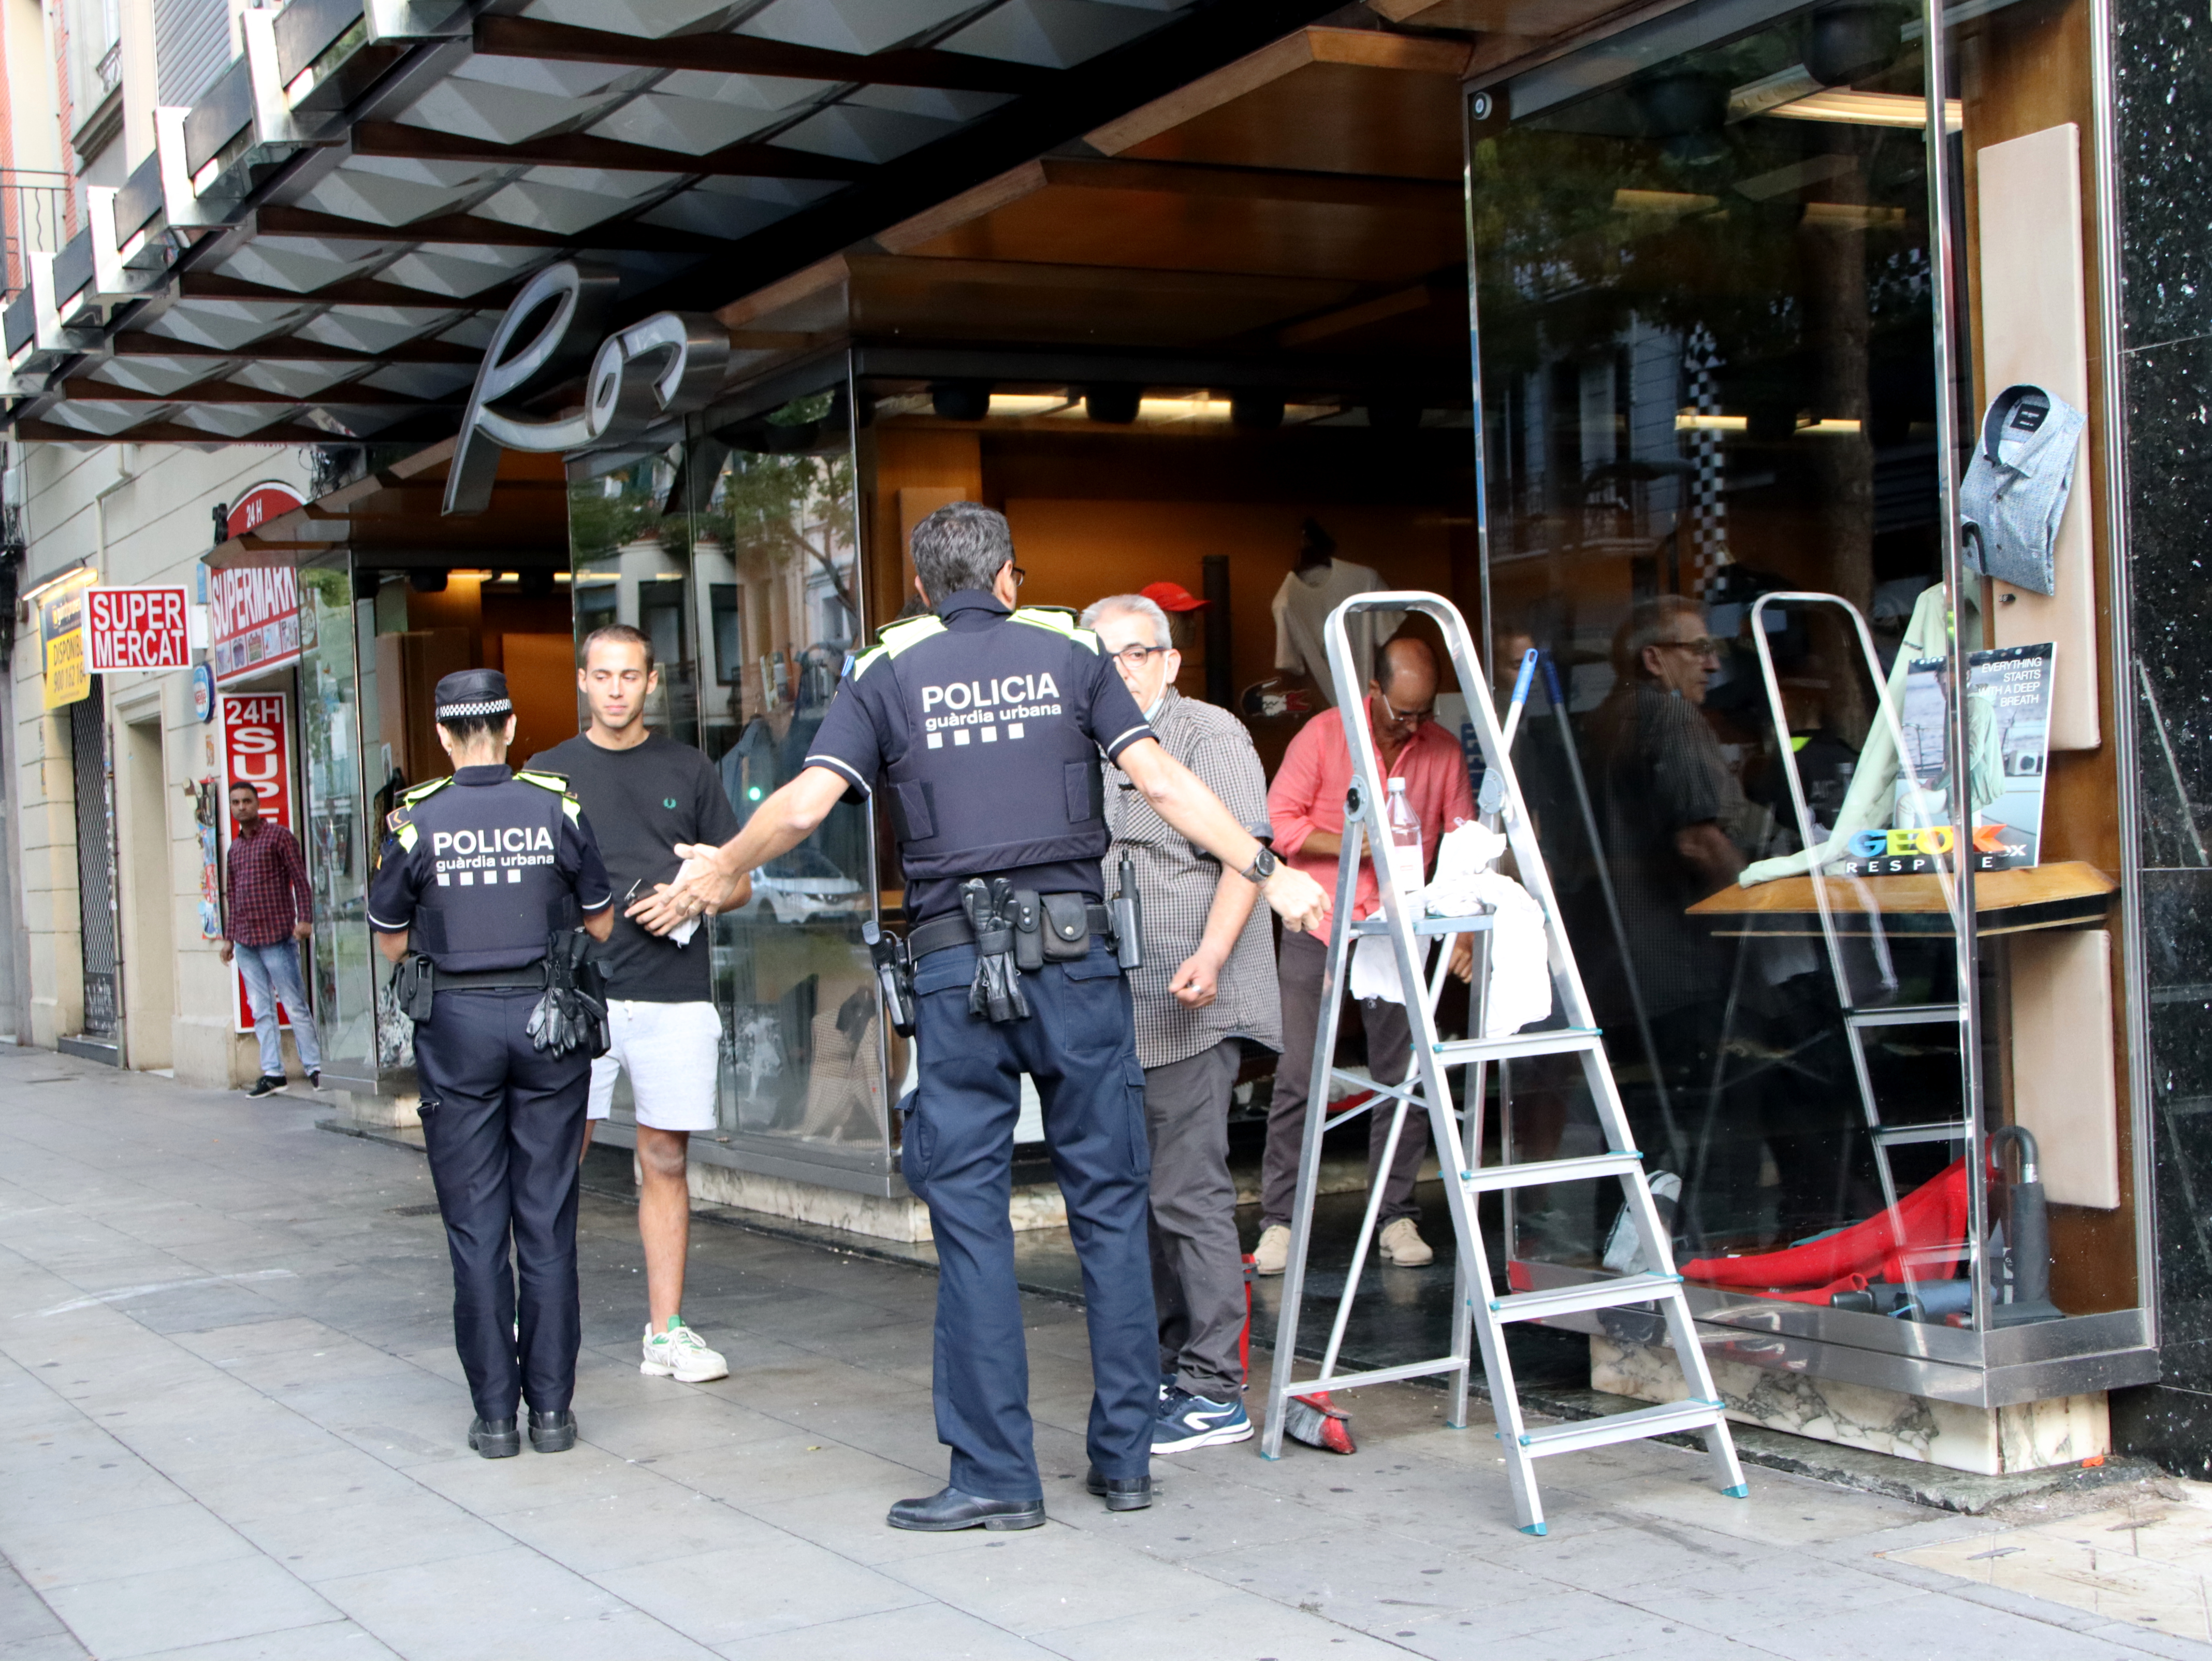 Police officers talking to a shopkeeper whose store was vandalized on Carrer Creu Coberta street in Barcelona on September 25, 2022